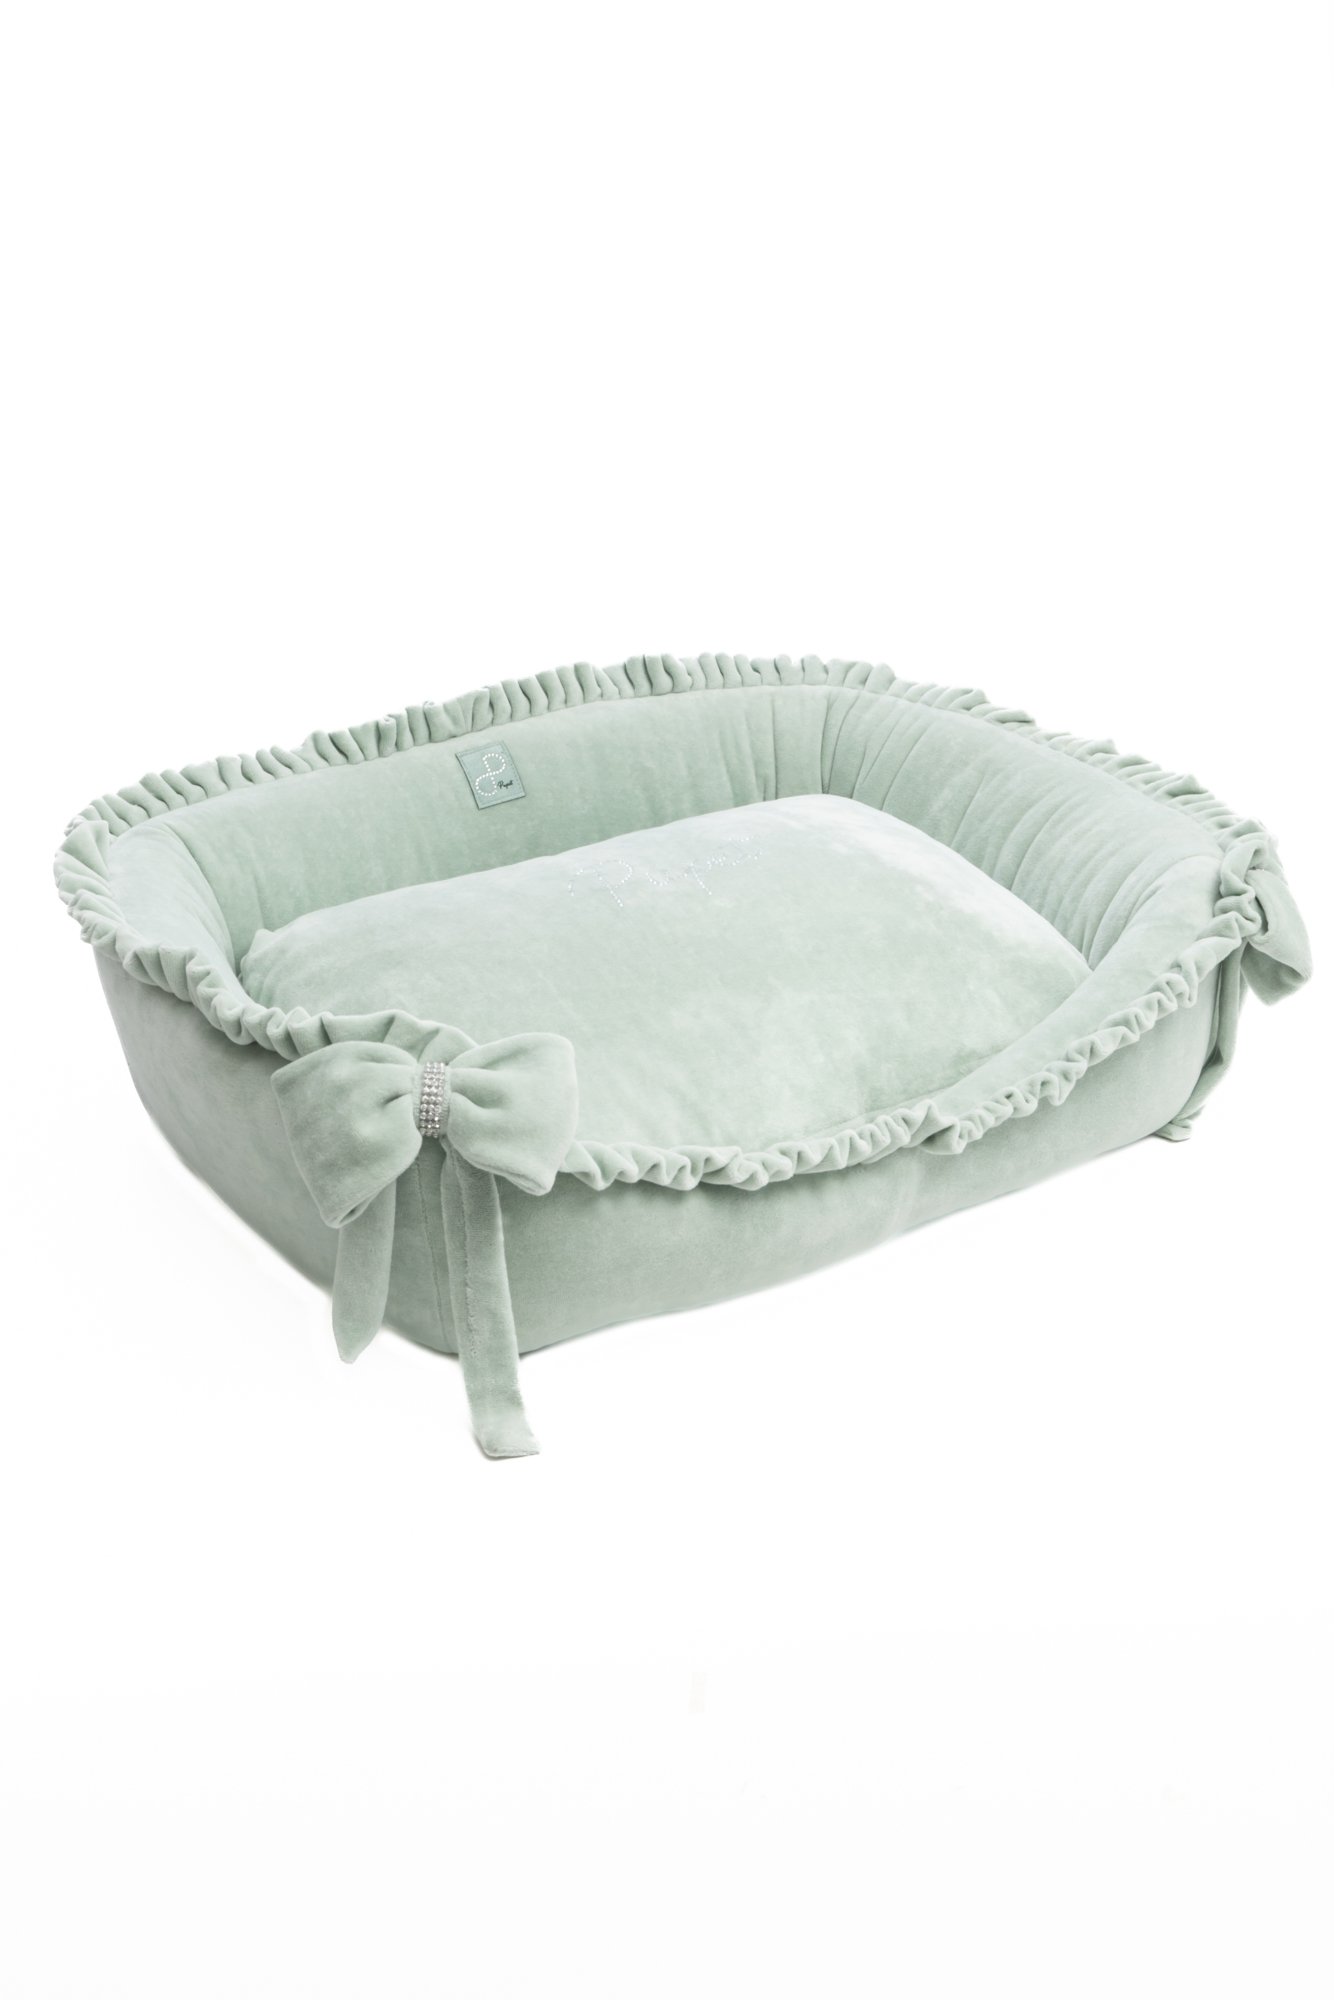 CHENILLE DOG BED